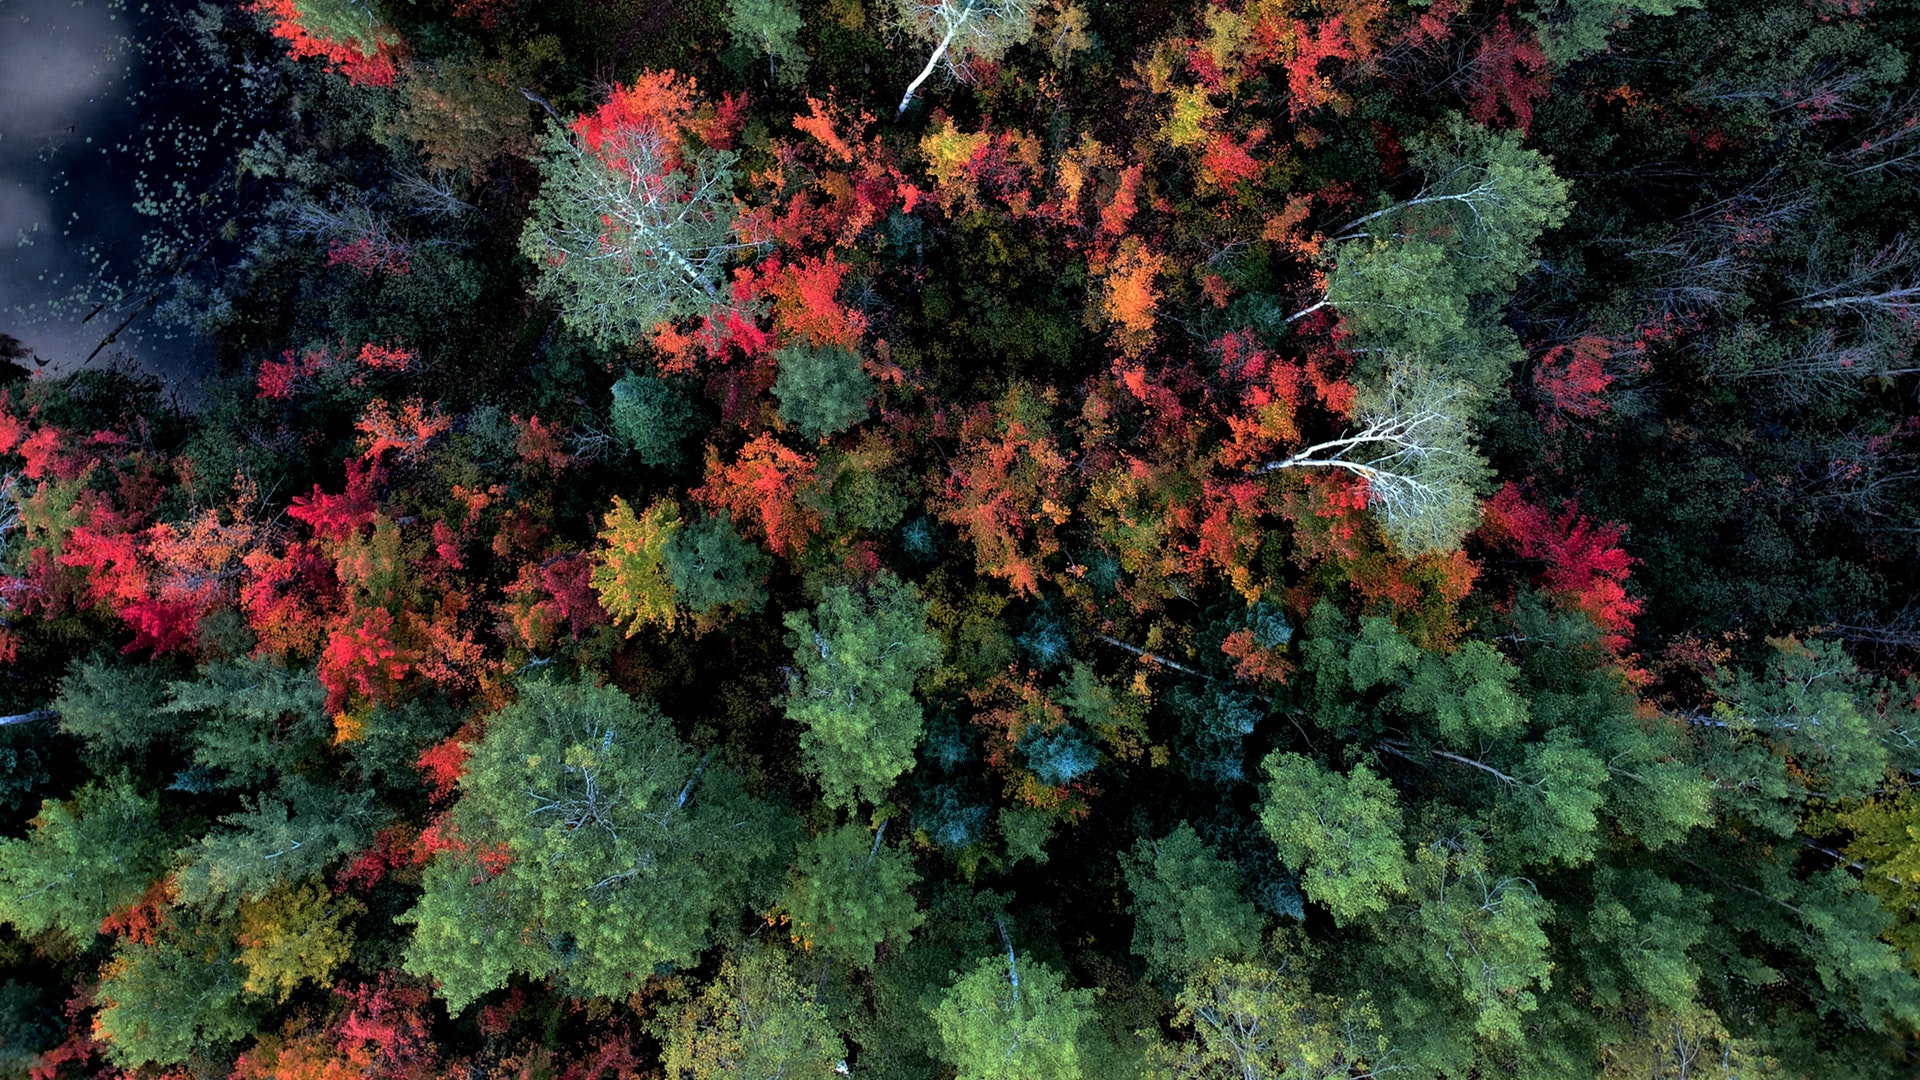 General 1920x1080 aerial view trees forest landscape nature fall branch colorful